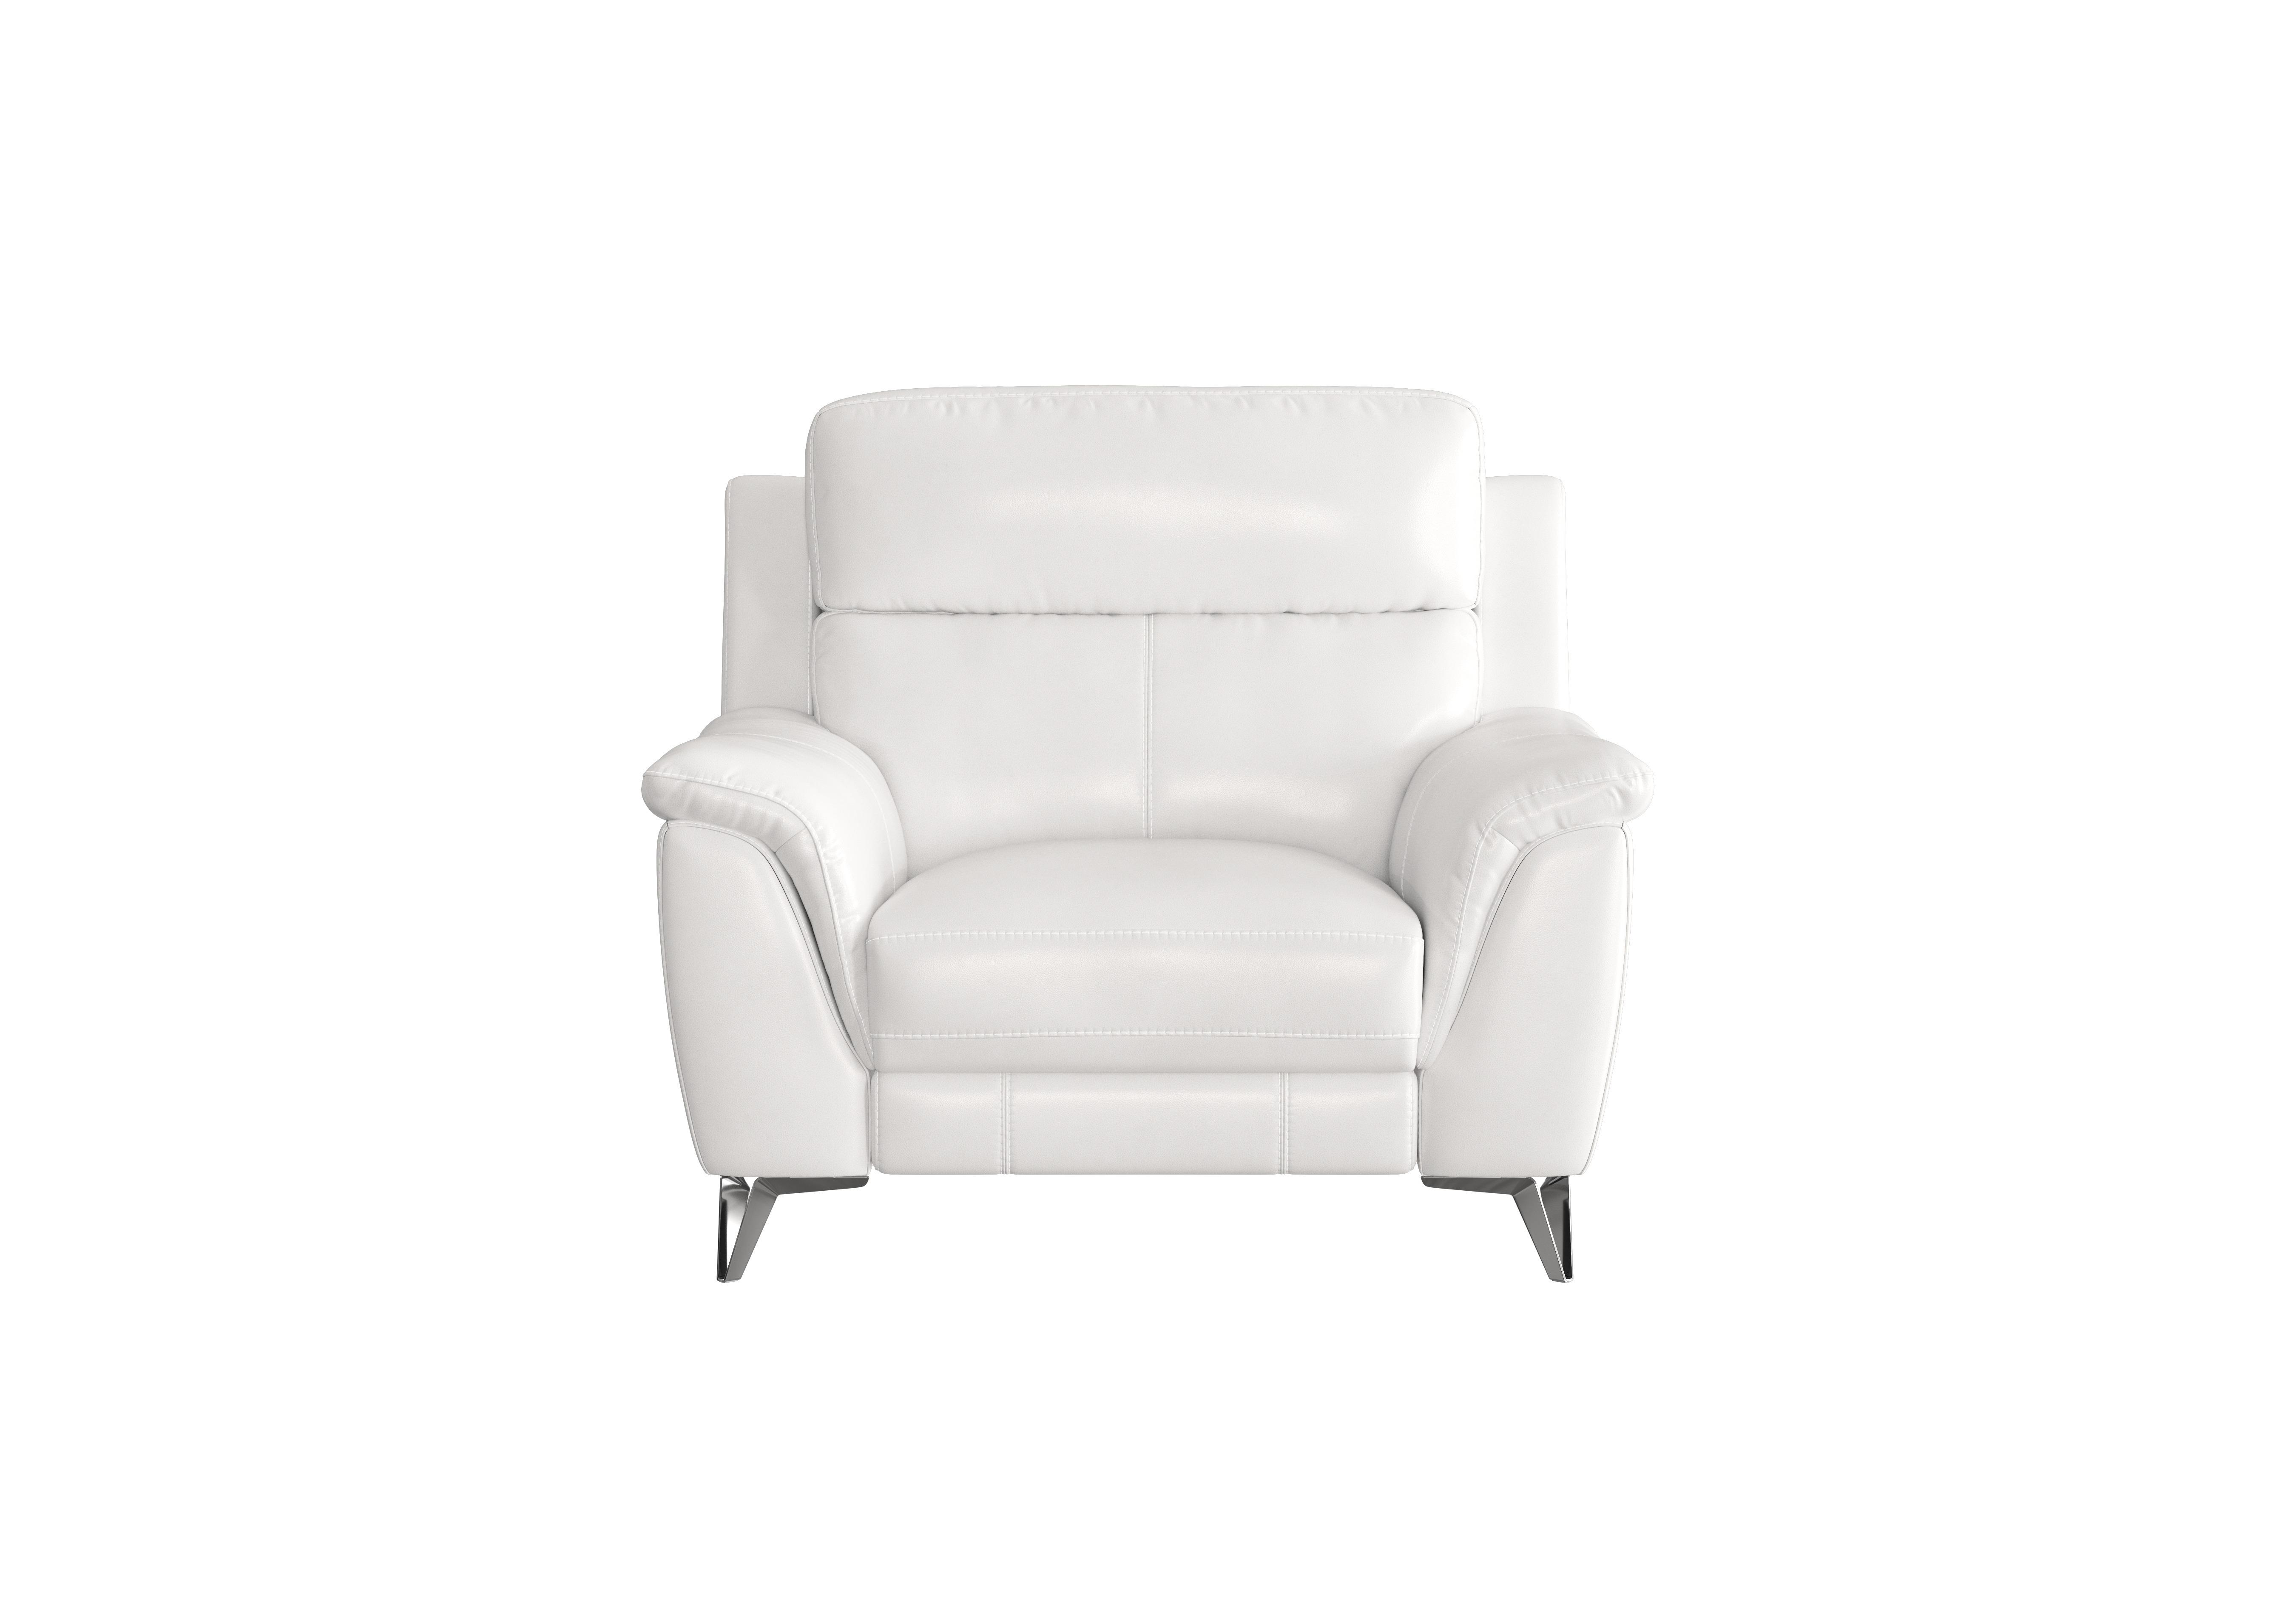 Contempo Leather Armchair in Bv-744d Star White on Furniture Village